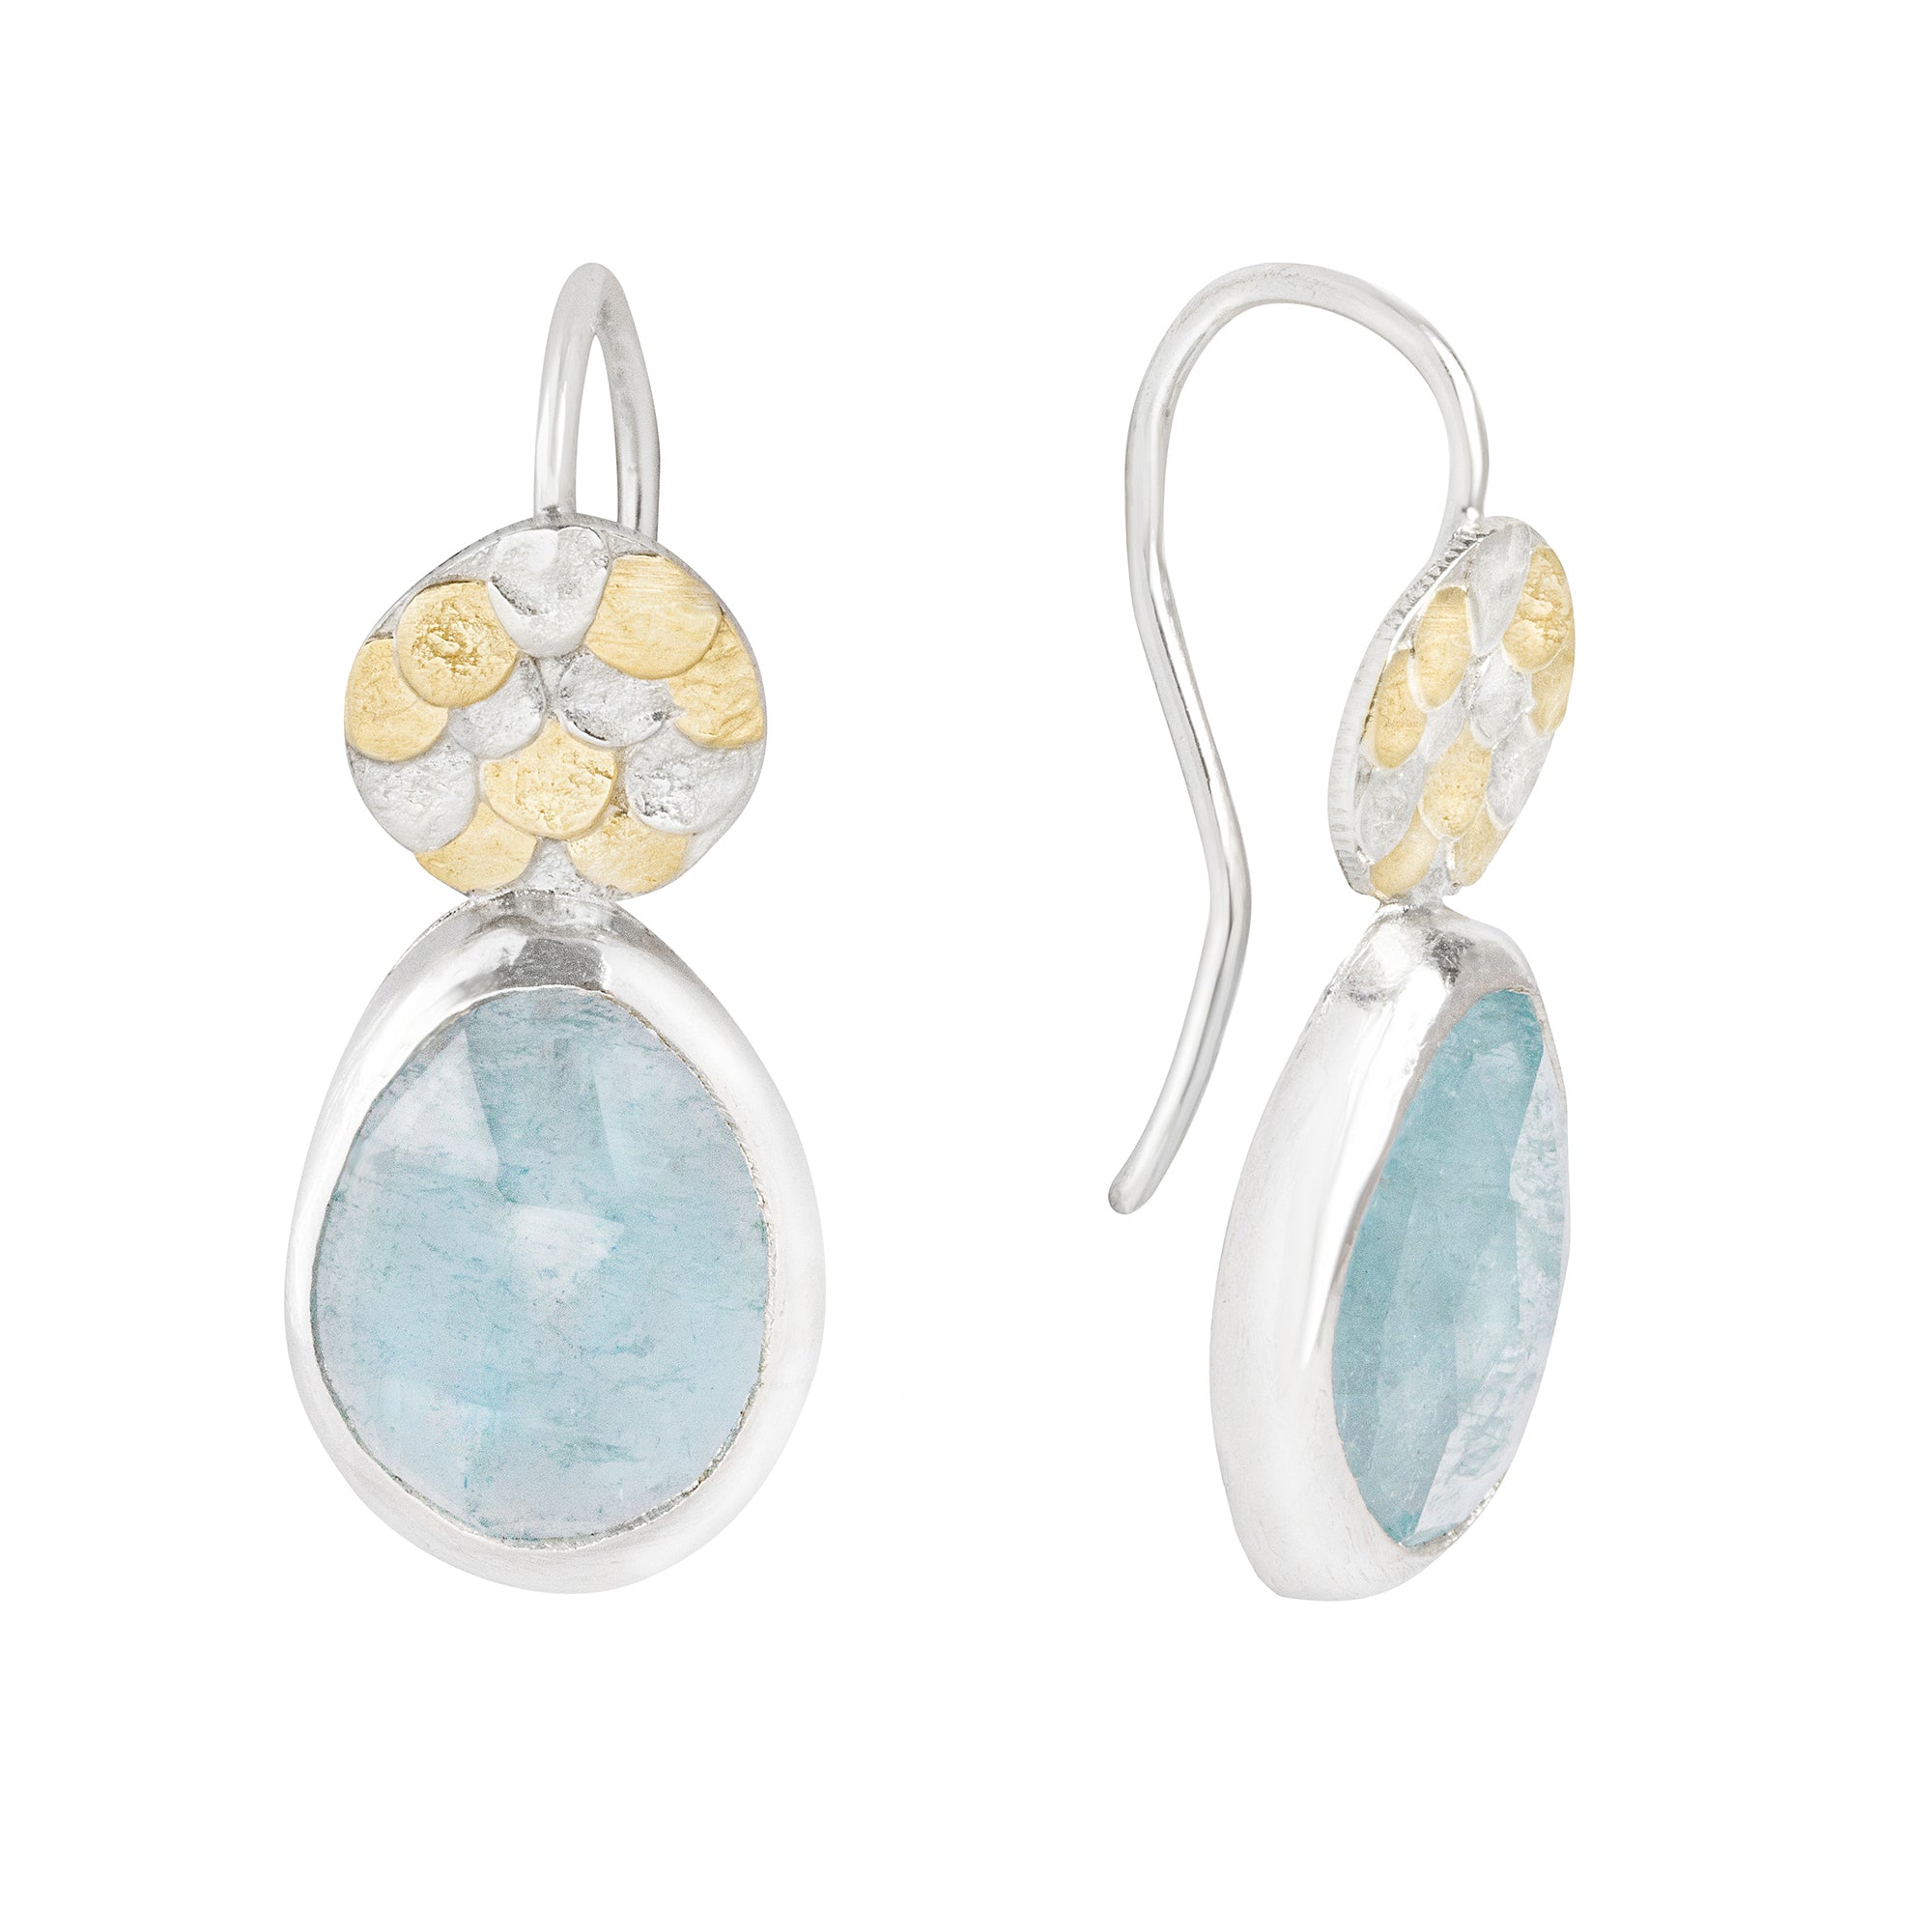 The handcrafted Aquamarine Siren drop earrings by Josie Mitchell Jewellery are one-of-a-kind and completely unique. The vibrant Aquamarines are full of magic and remind us of crystal clear Mediterranean waters. The earrings include Josie's signature Siren scale detailing at the top for the most magical pair of earrings..